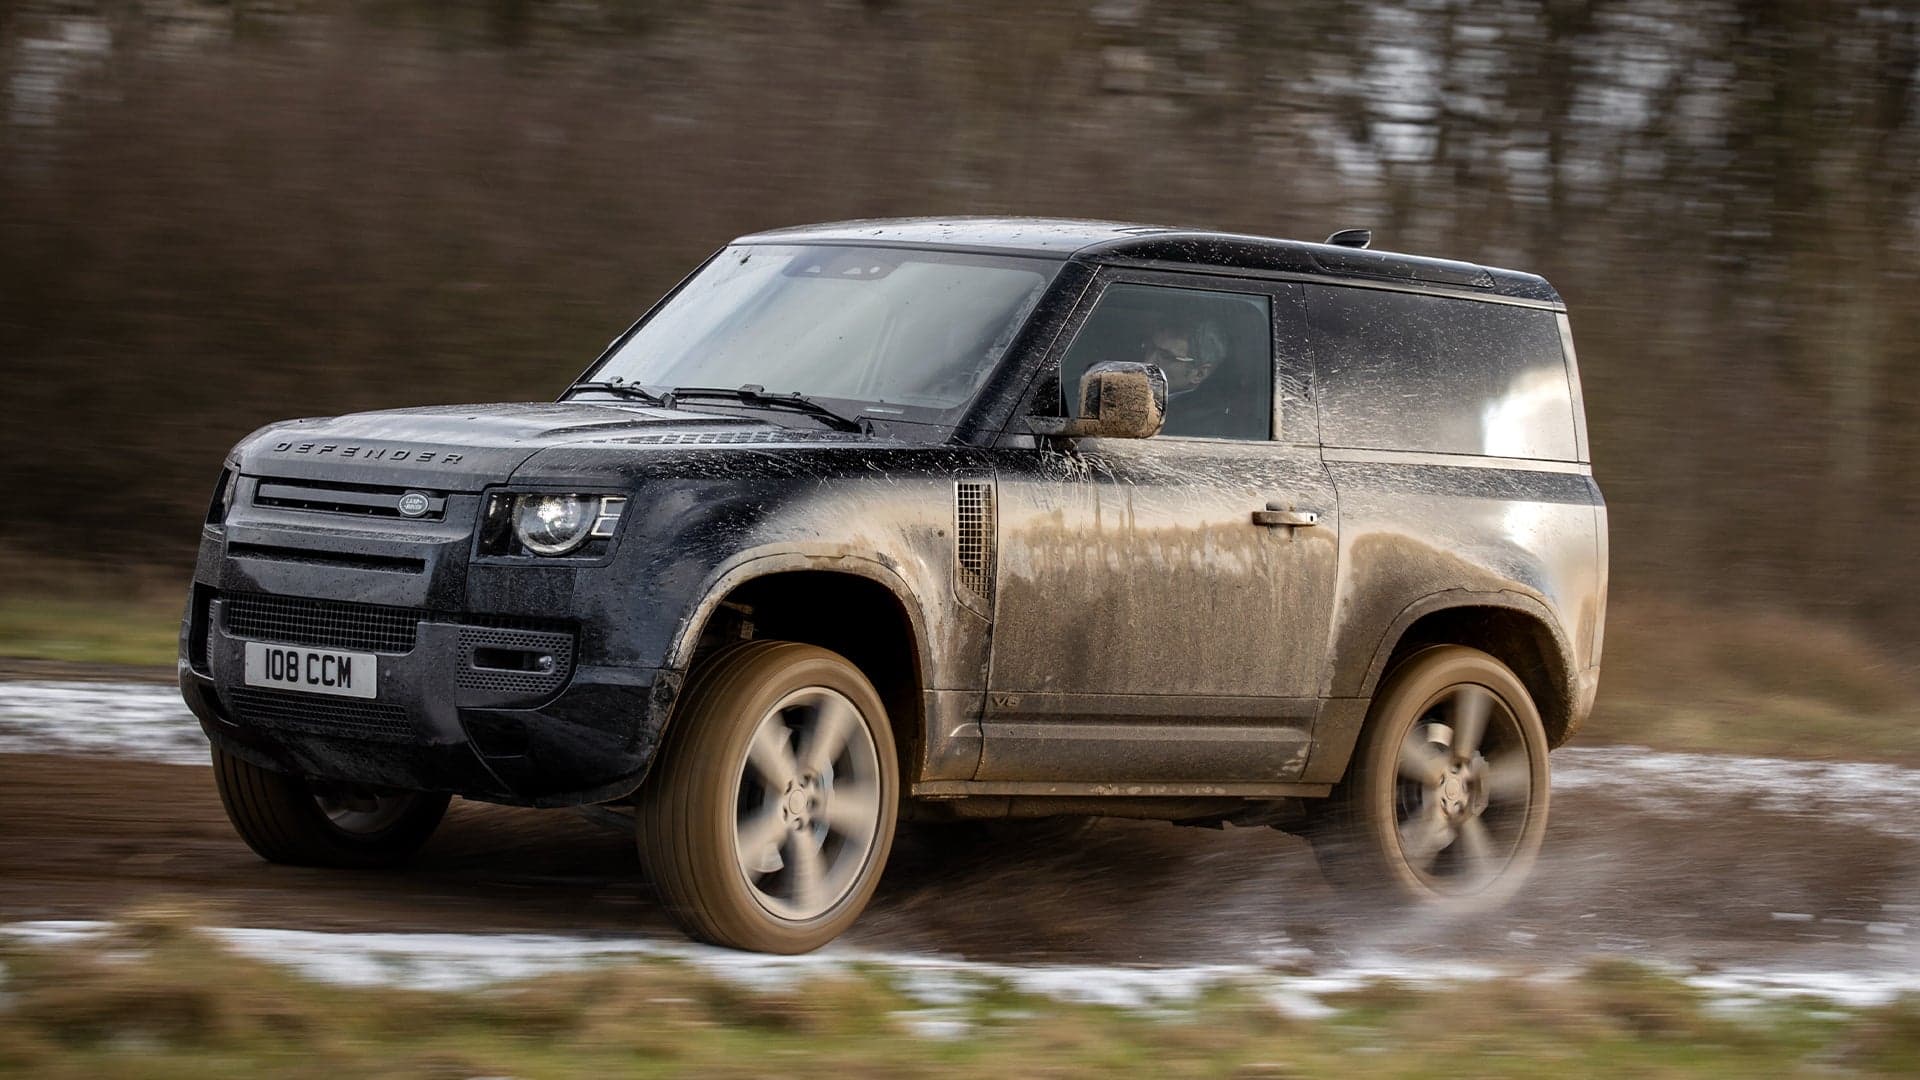 2022 Land Rover Defender V8 Jams a 5.0L, 518-HP Supercharged Mill in JLR’s Most Capable Truck